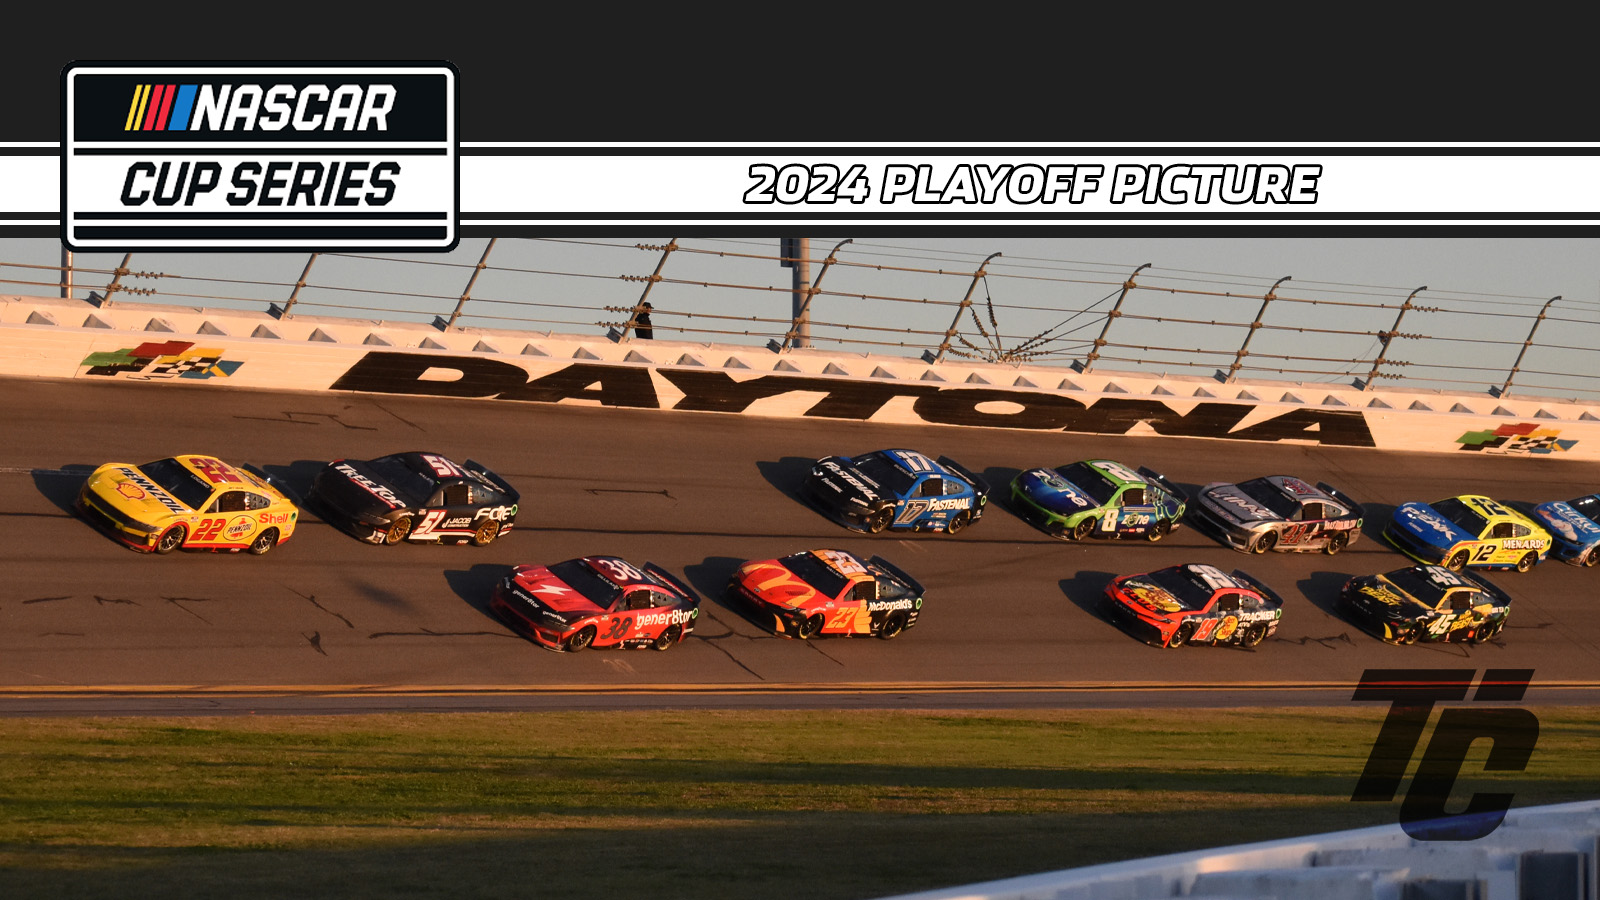 NASCAR Cup Series Playoff Picture 2024 NASCAR Cup Series Playoff Grid What drivers are in the 2024 NASCAR Cup Series Playoffs?